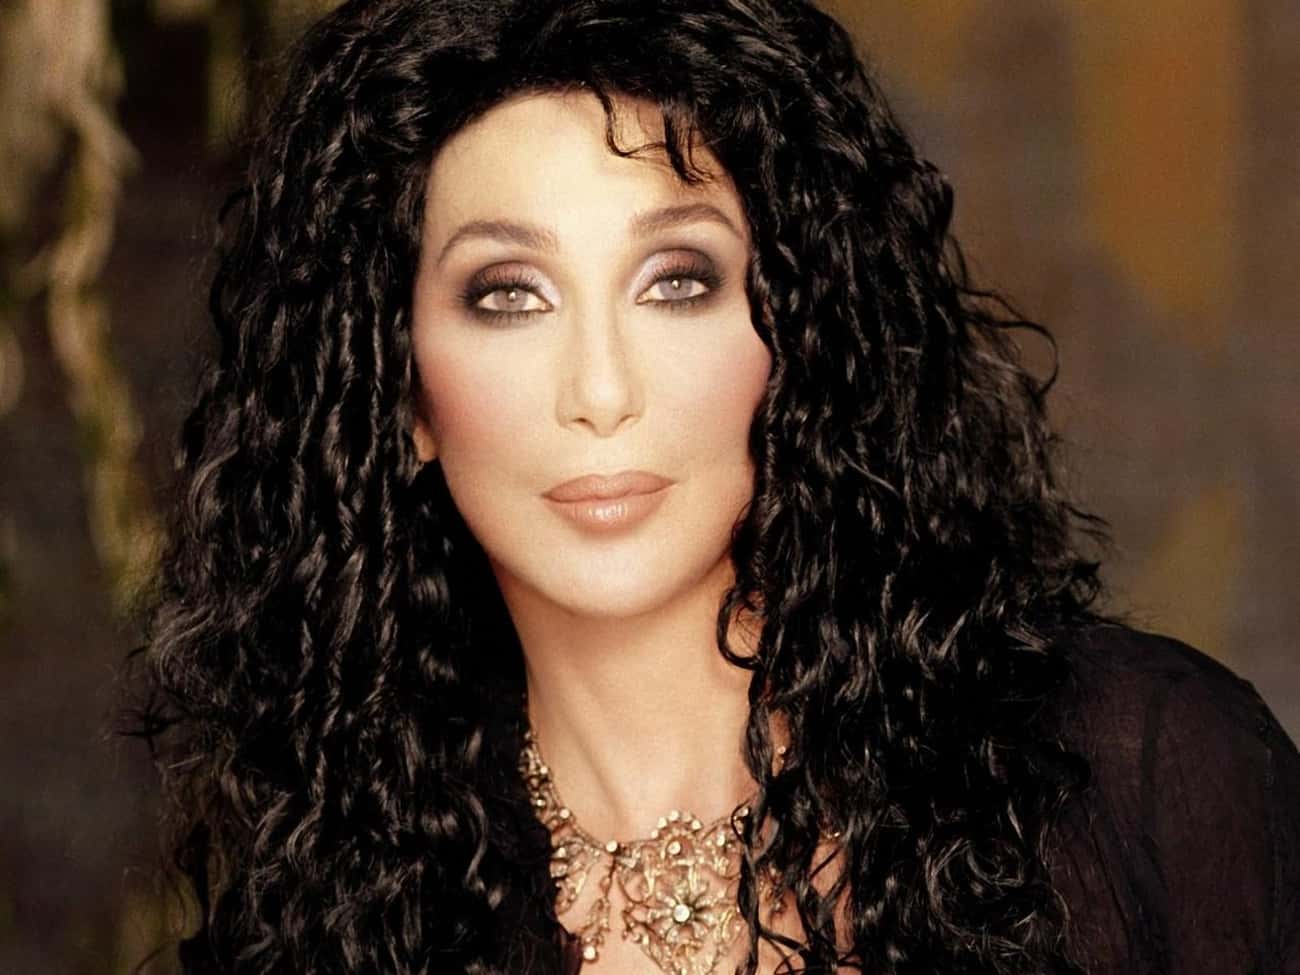 Cher's Long Blonde Hair: The History Behind Her Most Famous Feature - wide 4